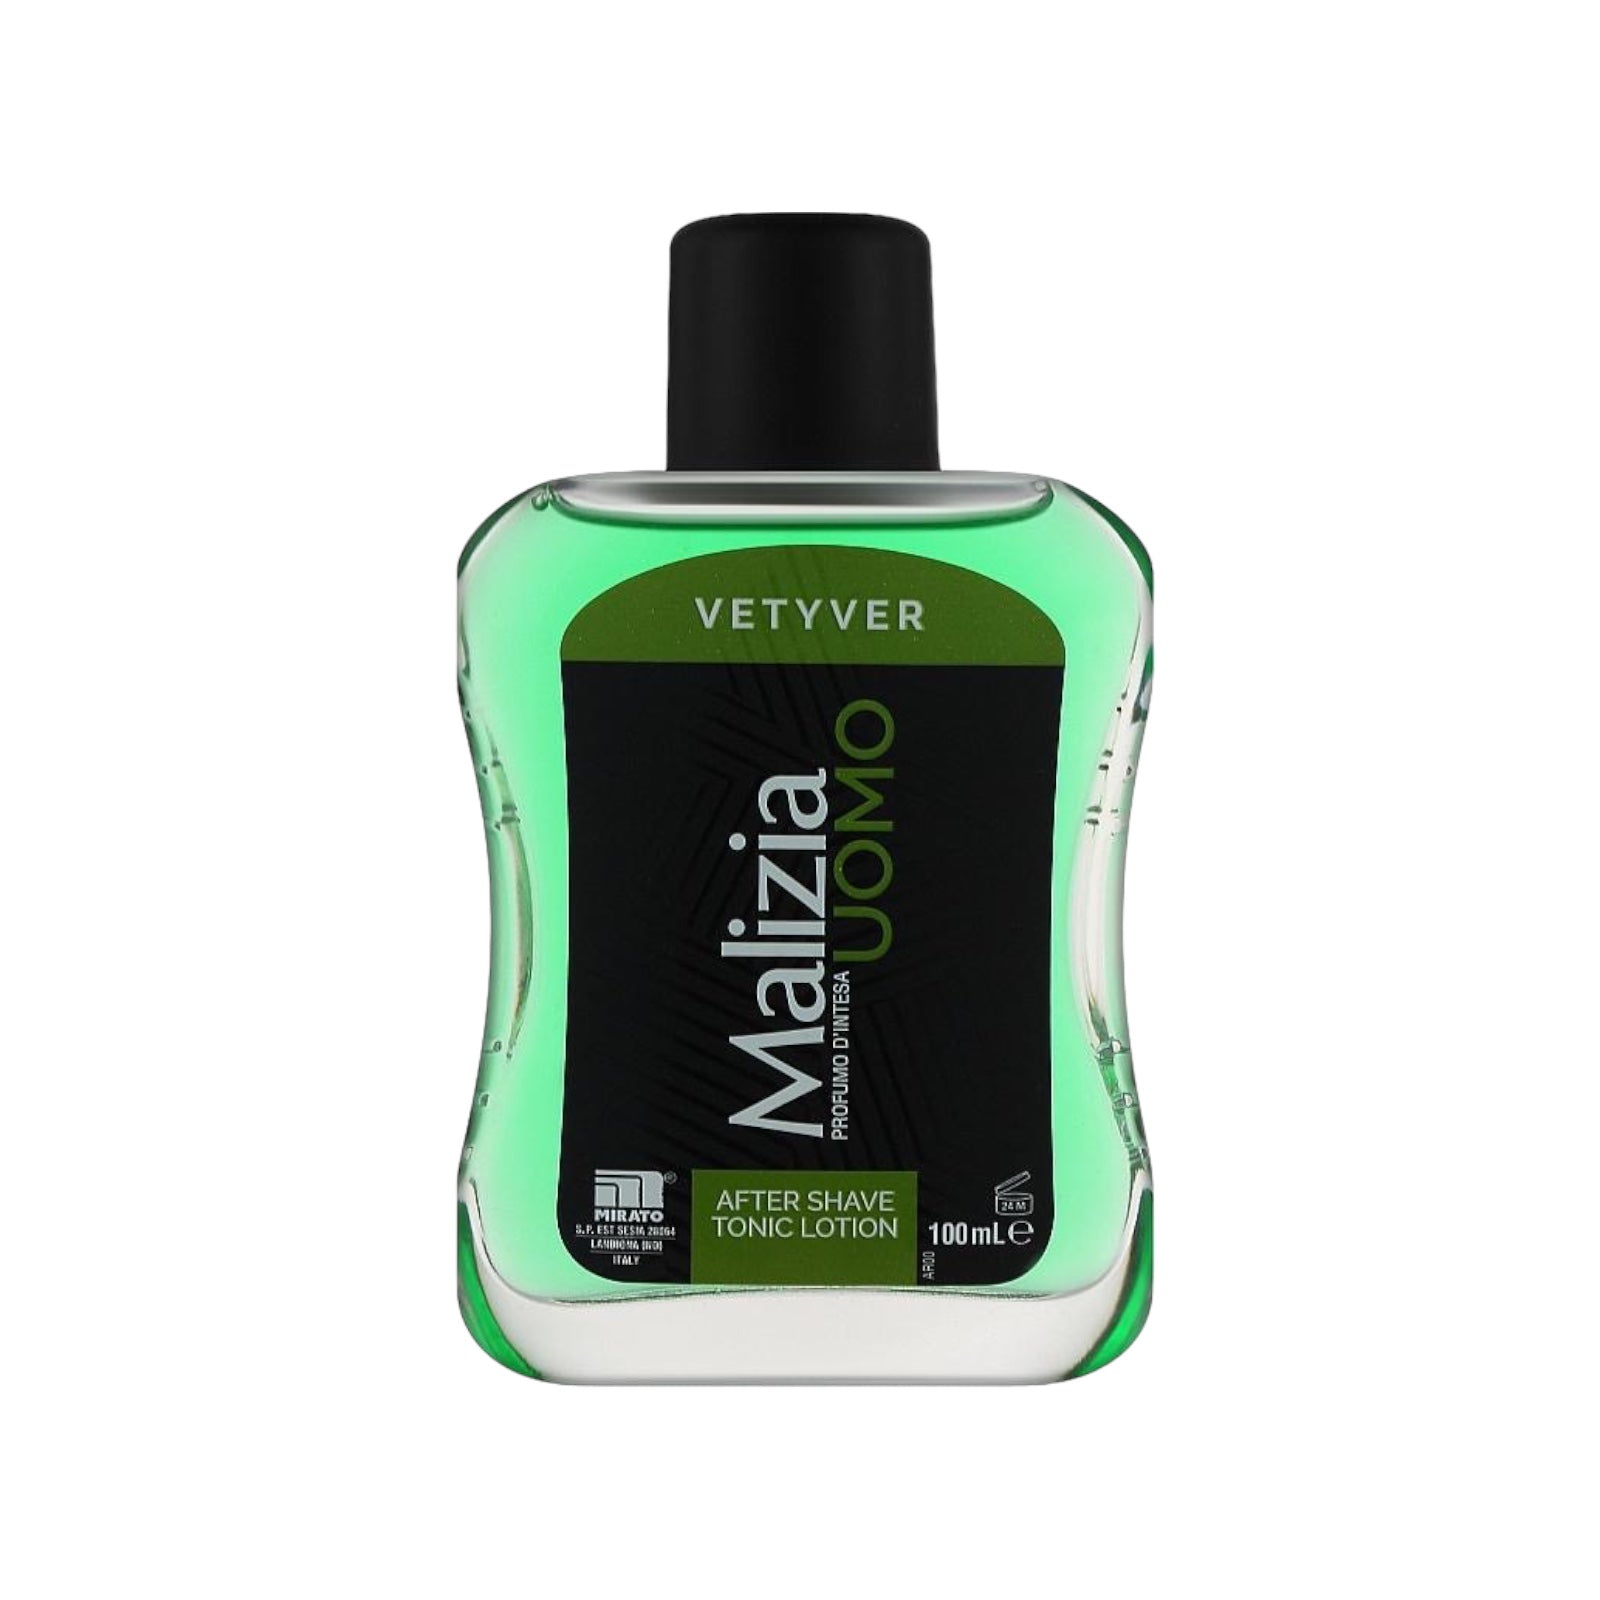 Malizia Uomo Vetyver by Mirato Aftershave/Tonic Lotion 100ml